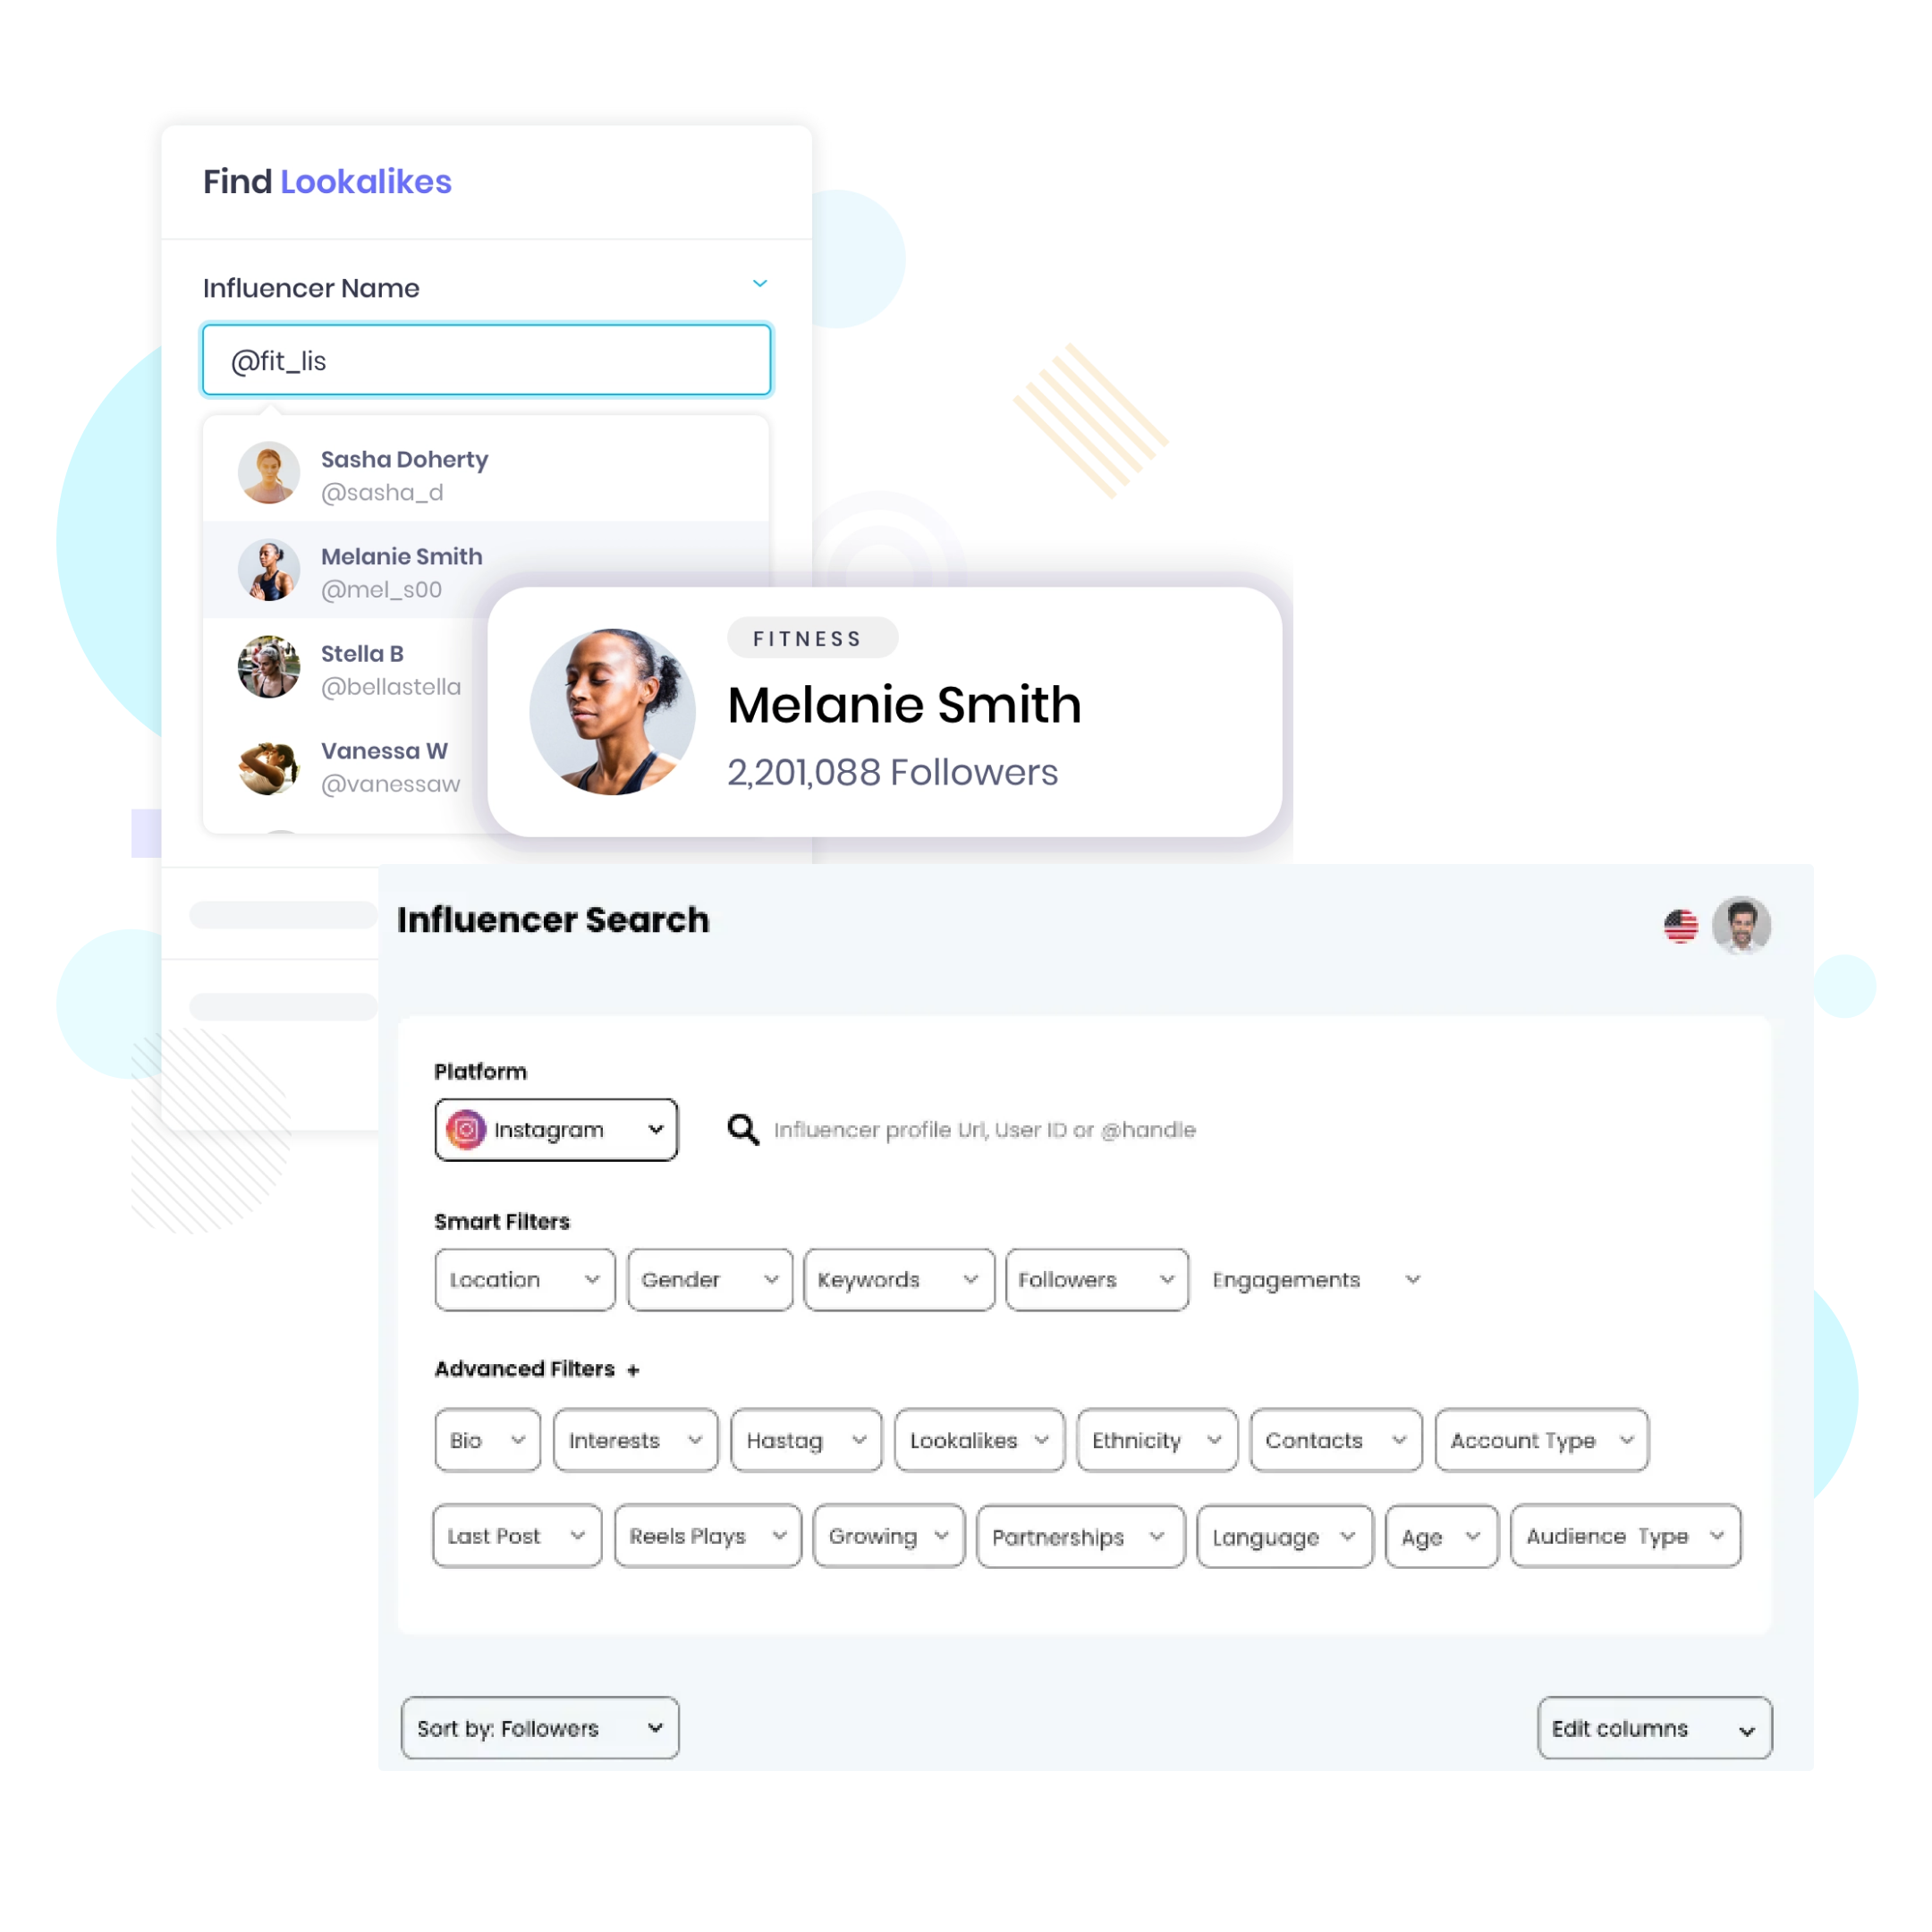 Invite Influencers Made Easy